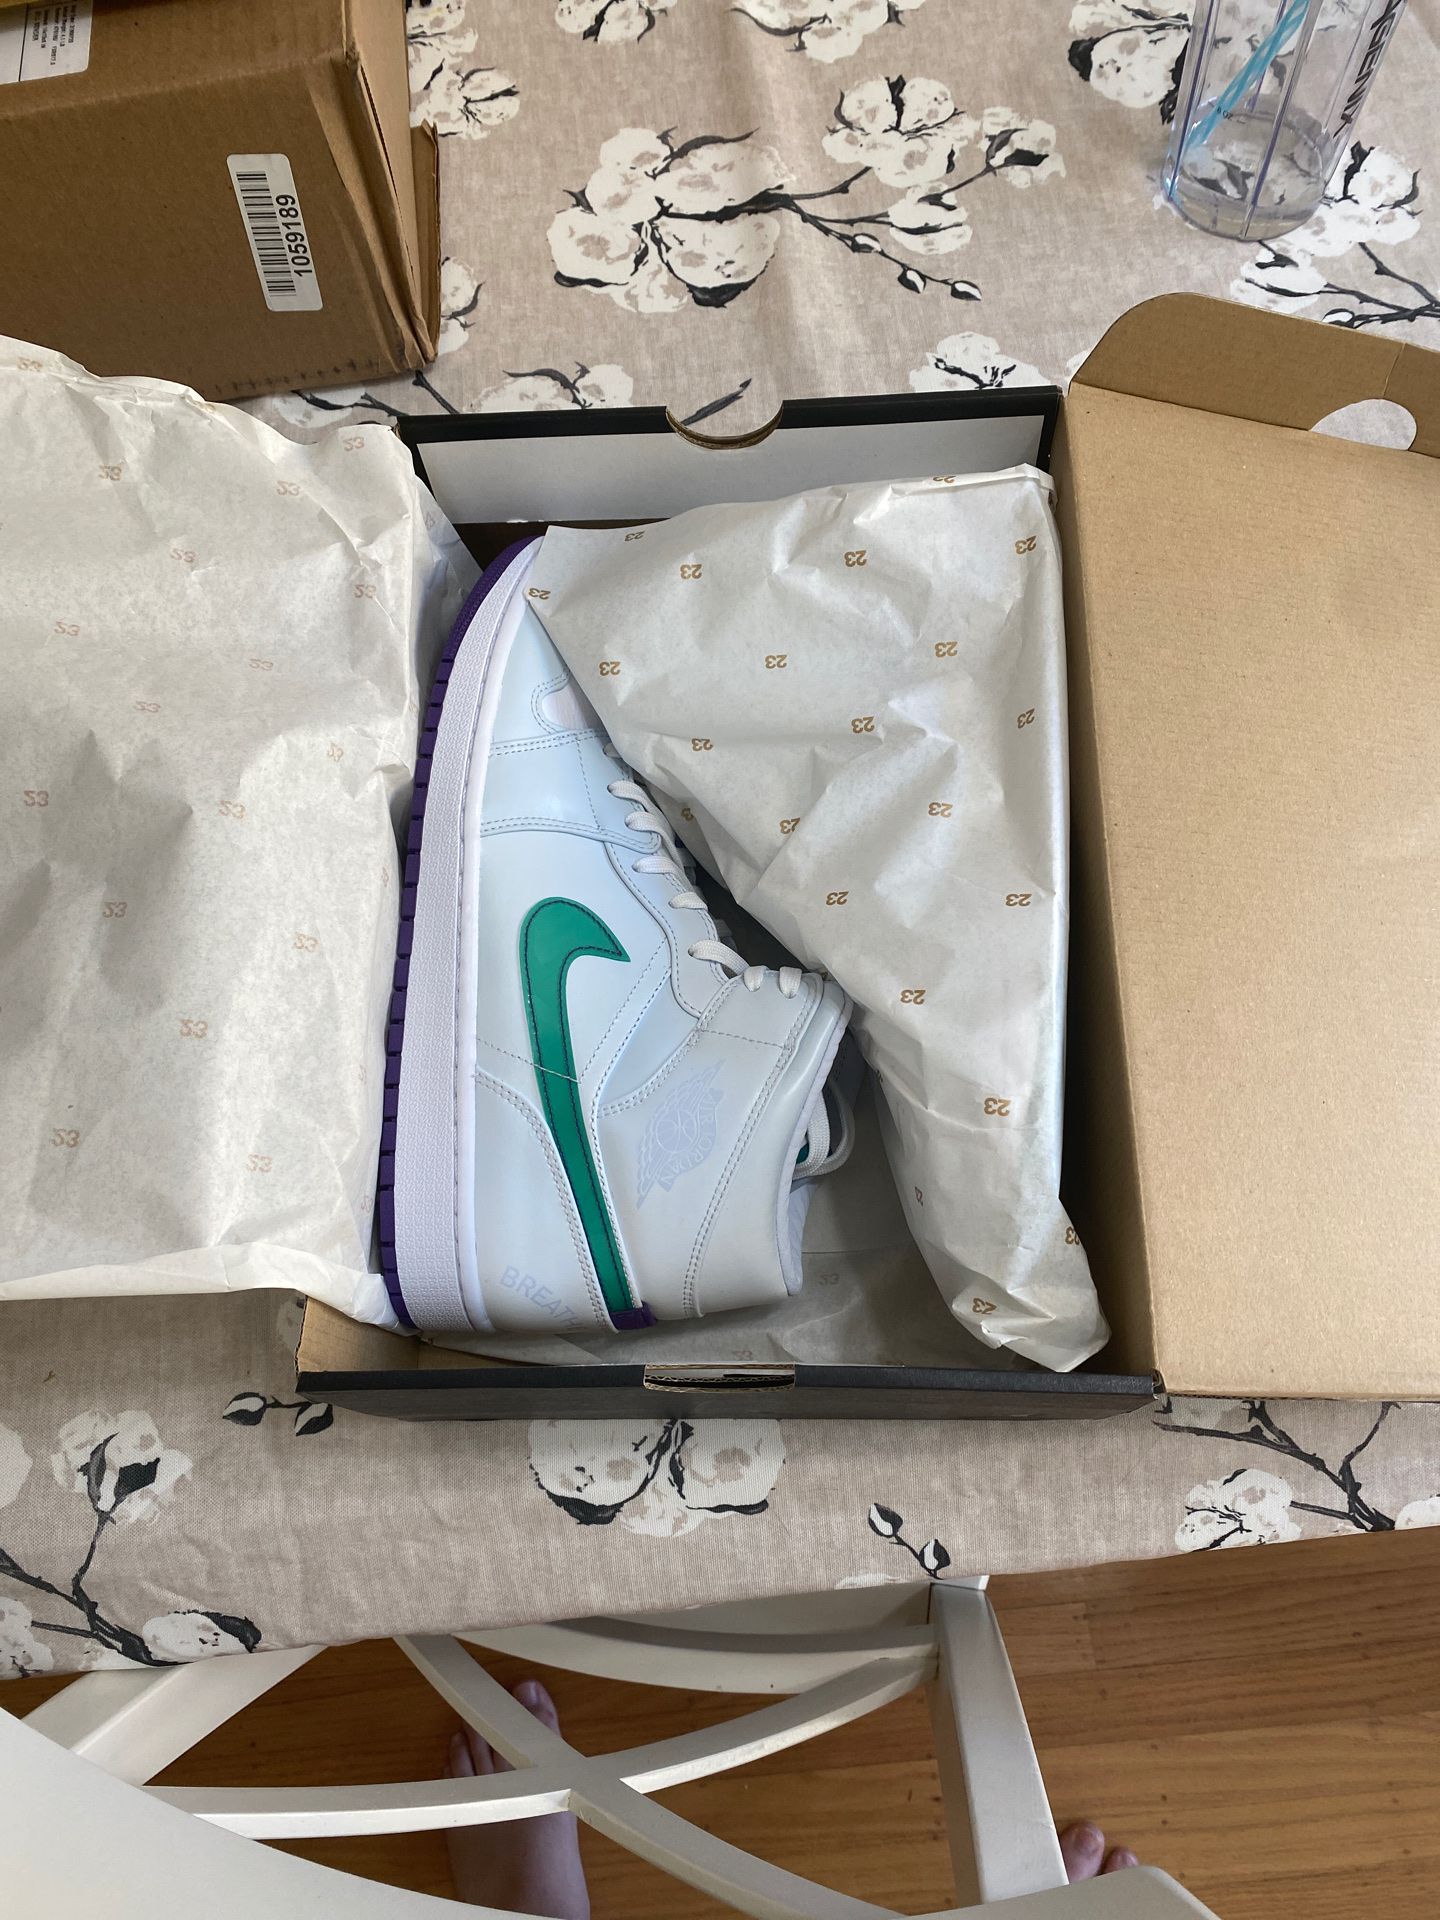 Brand New DS Jordan 1 mid Luka Doncic size 11 $170